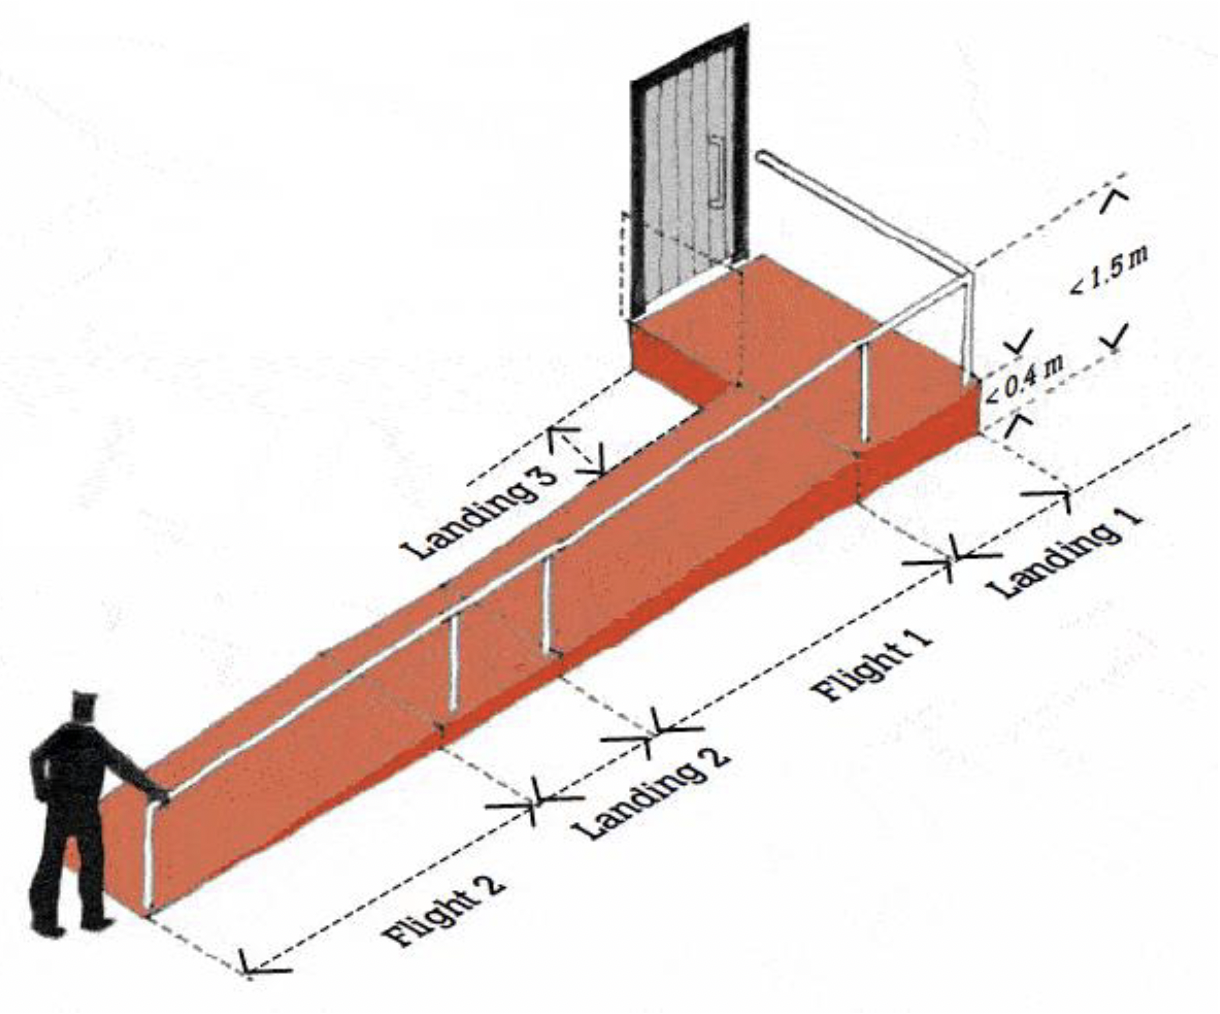 Illustration of the limitations for an access ramp.